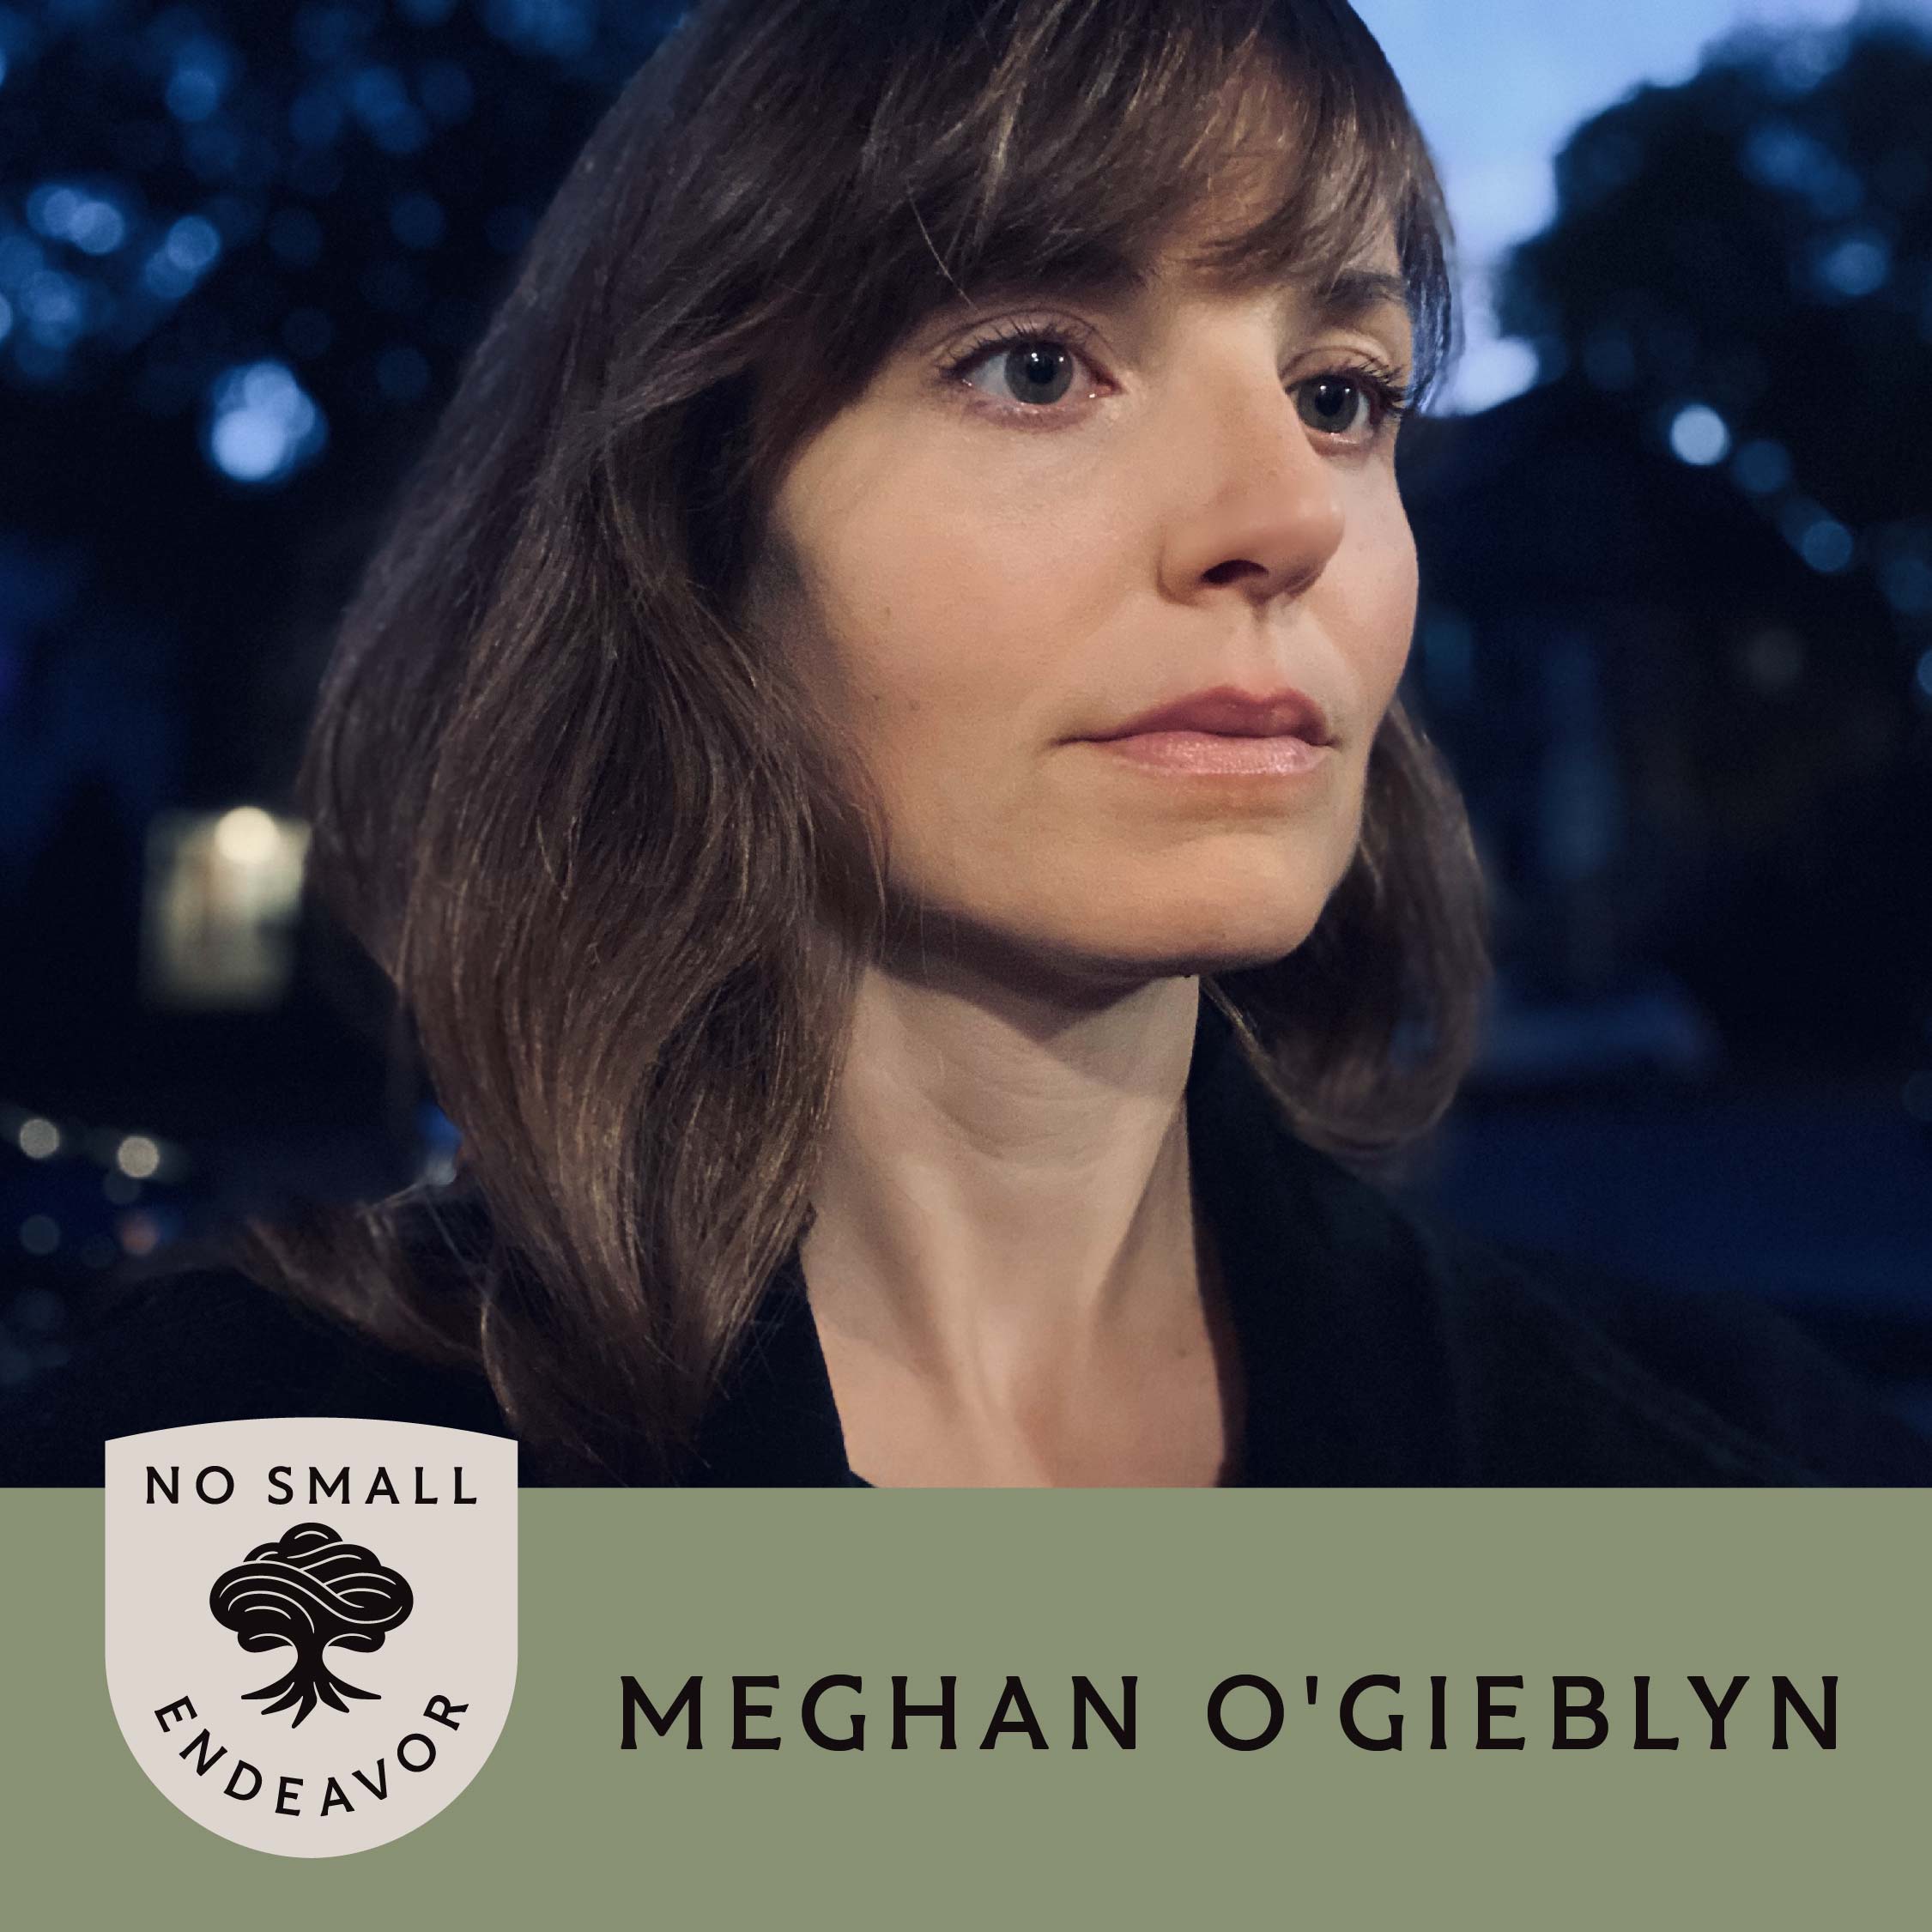 Thumbnail for "125: Meghan O’Gieblyn: Will AI Destroy Humanity?".